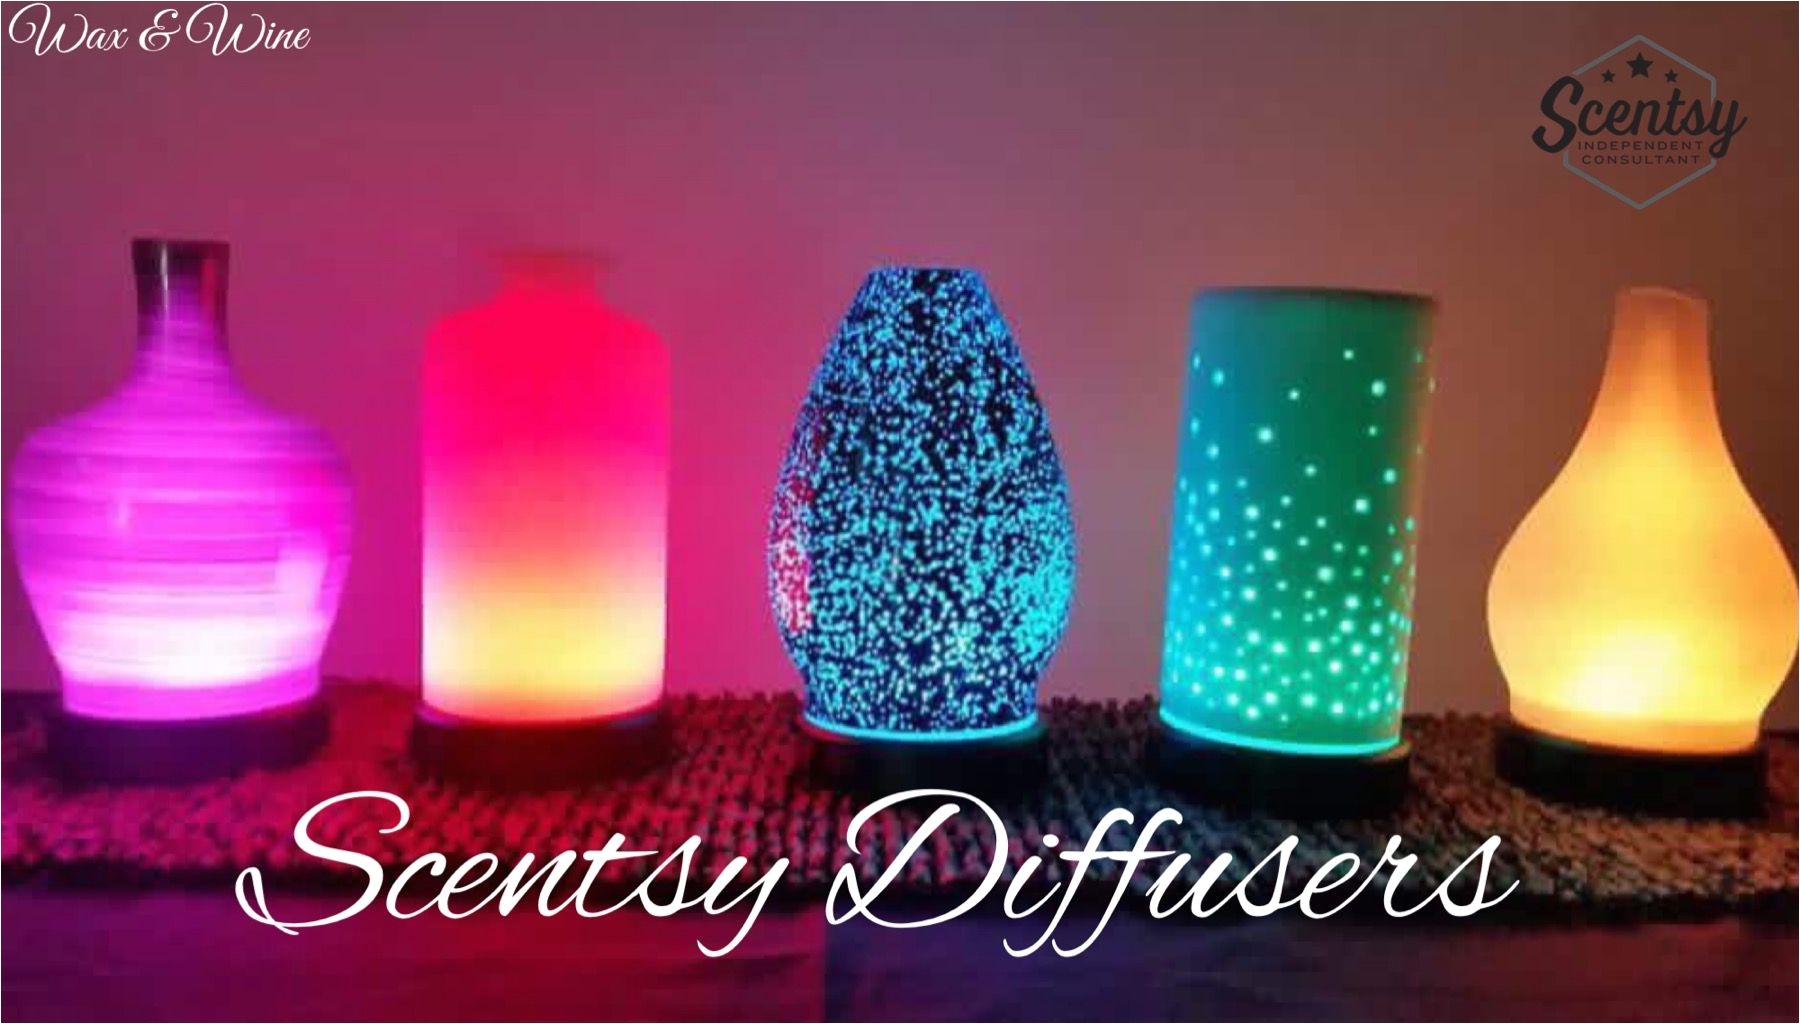 scentsy isnt just wax warmers its also diffusers diffuse natural and essential oils in our beautiful and stunning diffusers the longest lasting